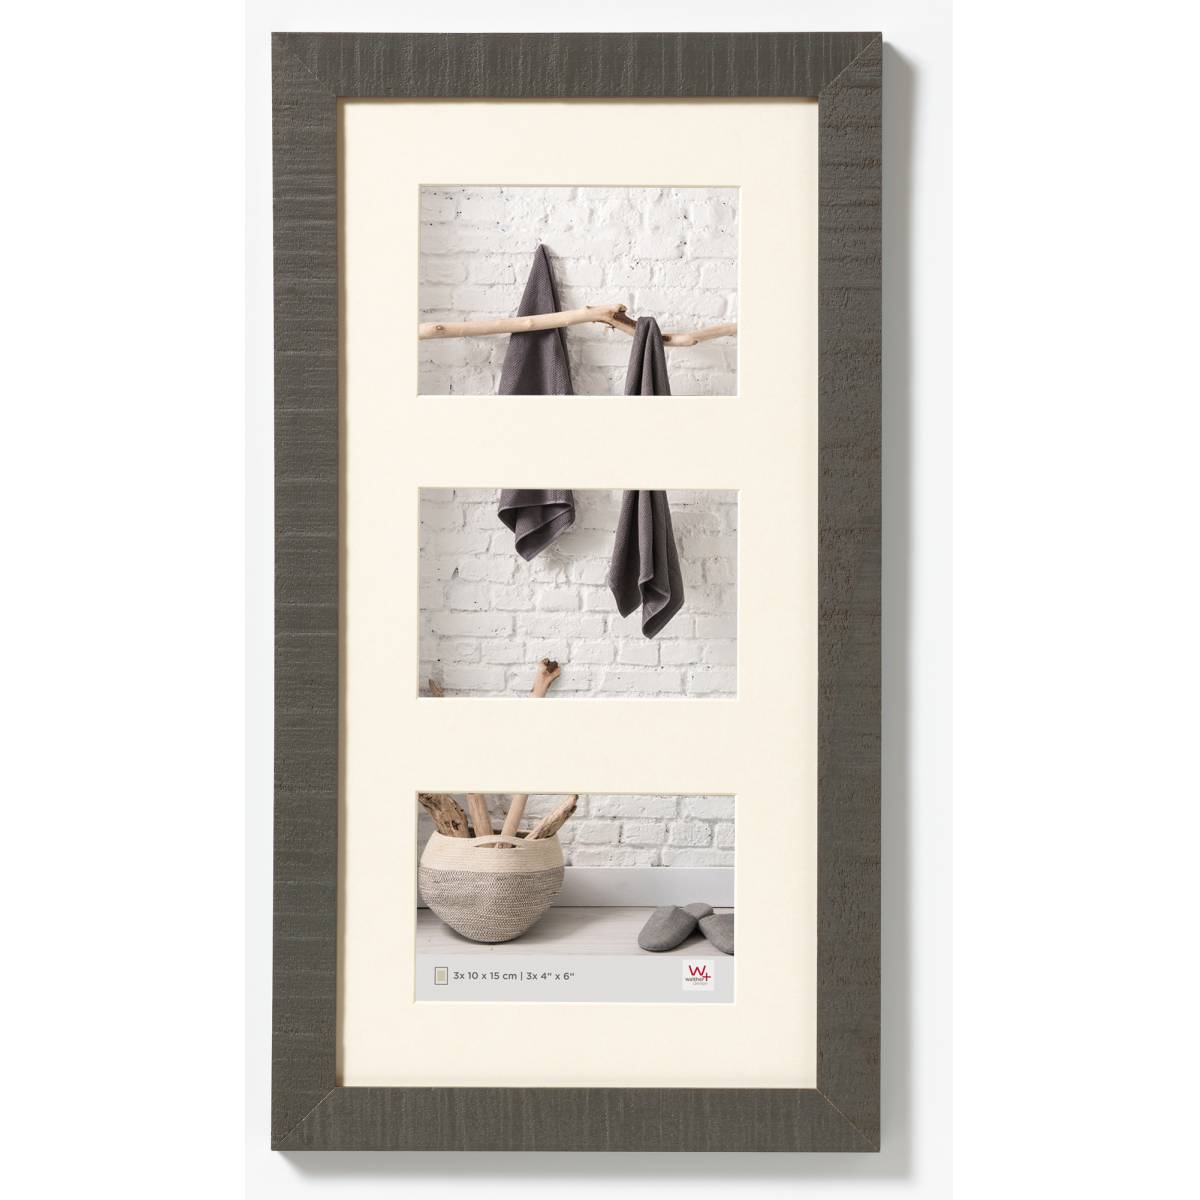 Walther Home Wooden Multi Picture Frame for 3x 6x4 inch - Grey